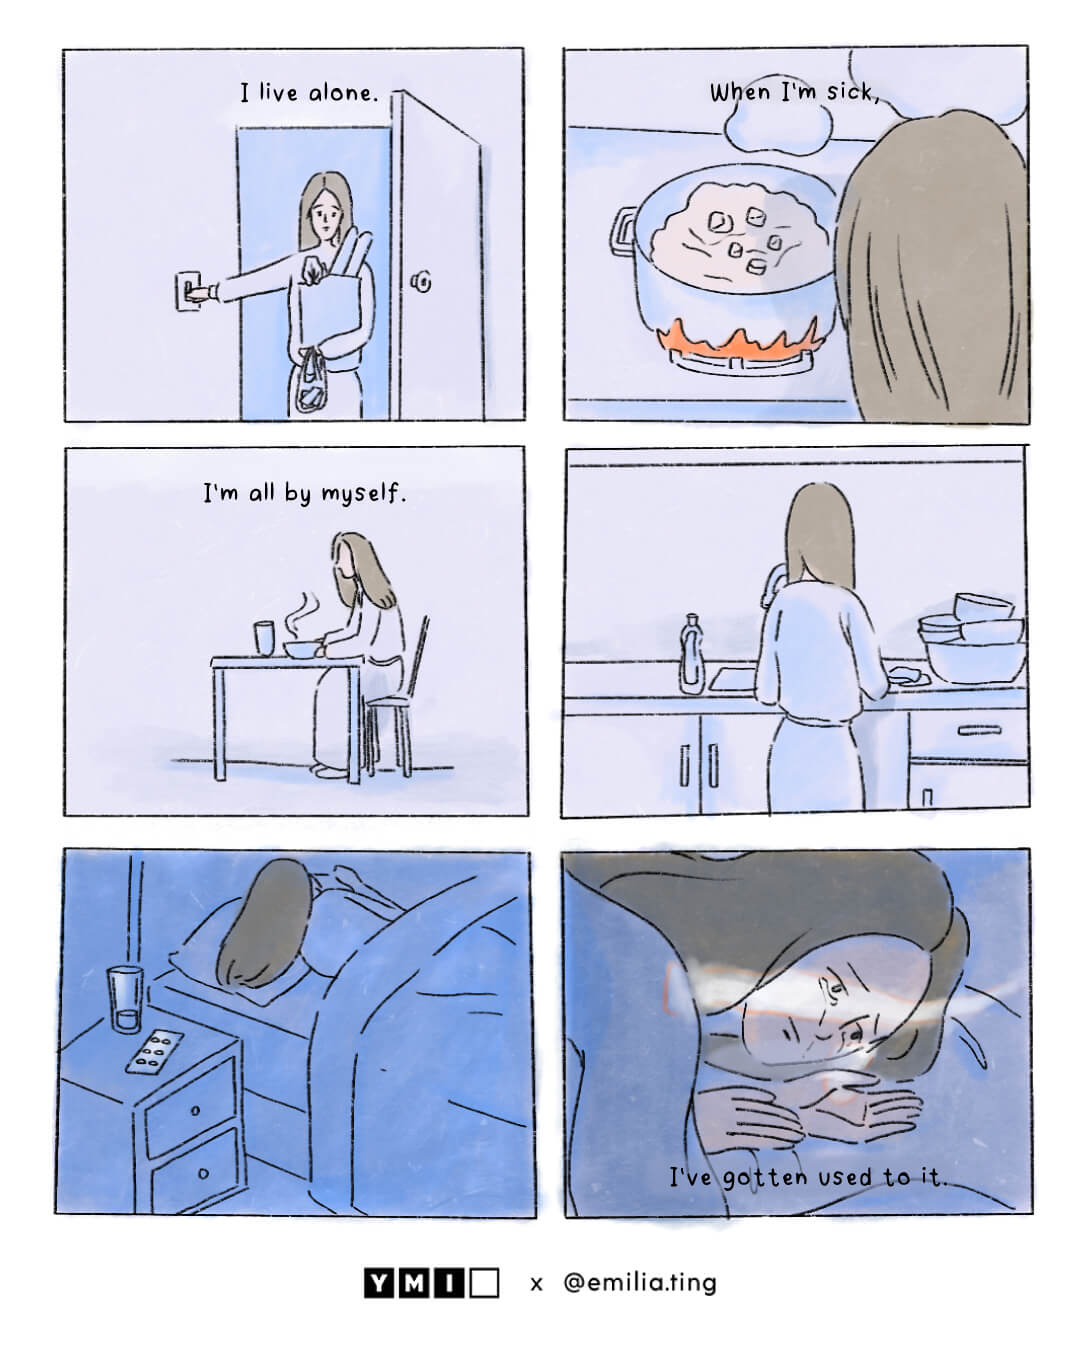 6 panels of comic to convey the loneliness of staying alone, and do not have someone who can physically helping or accompanying.